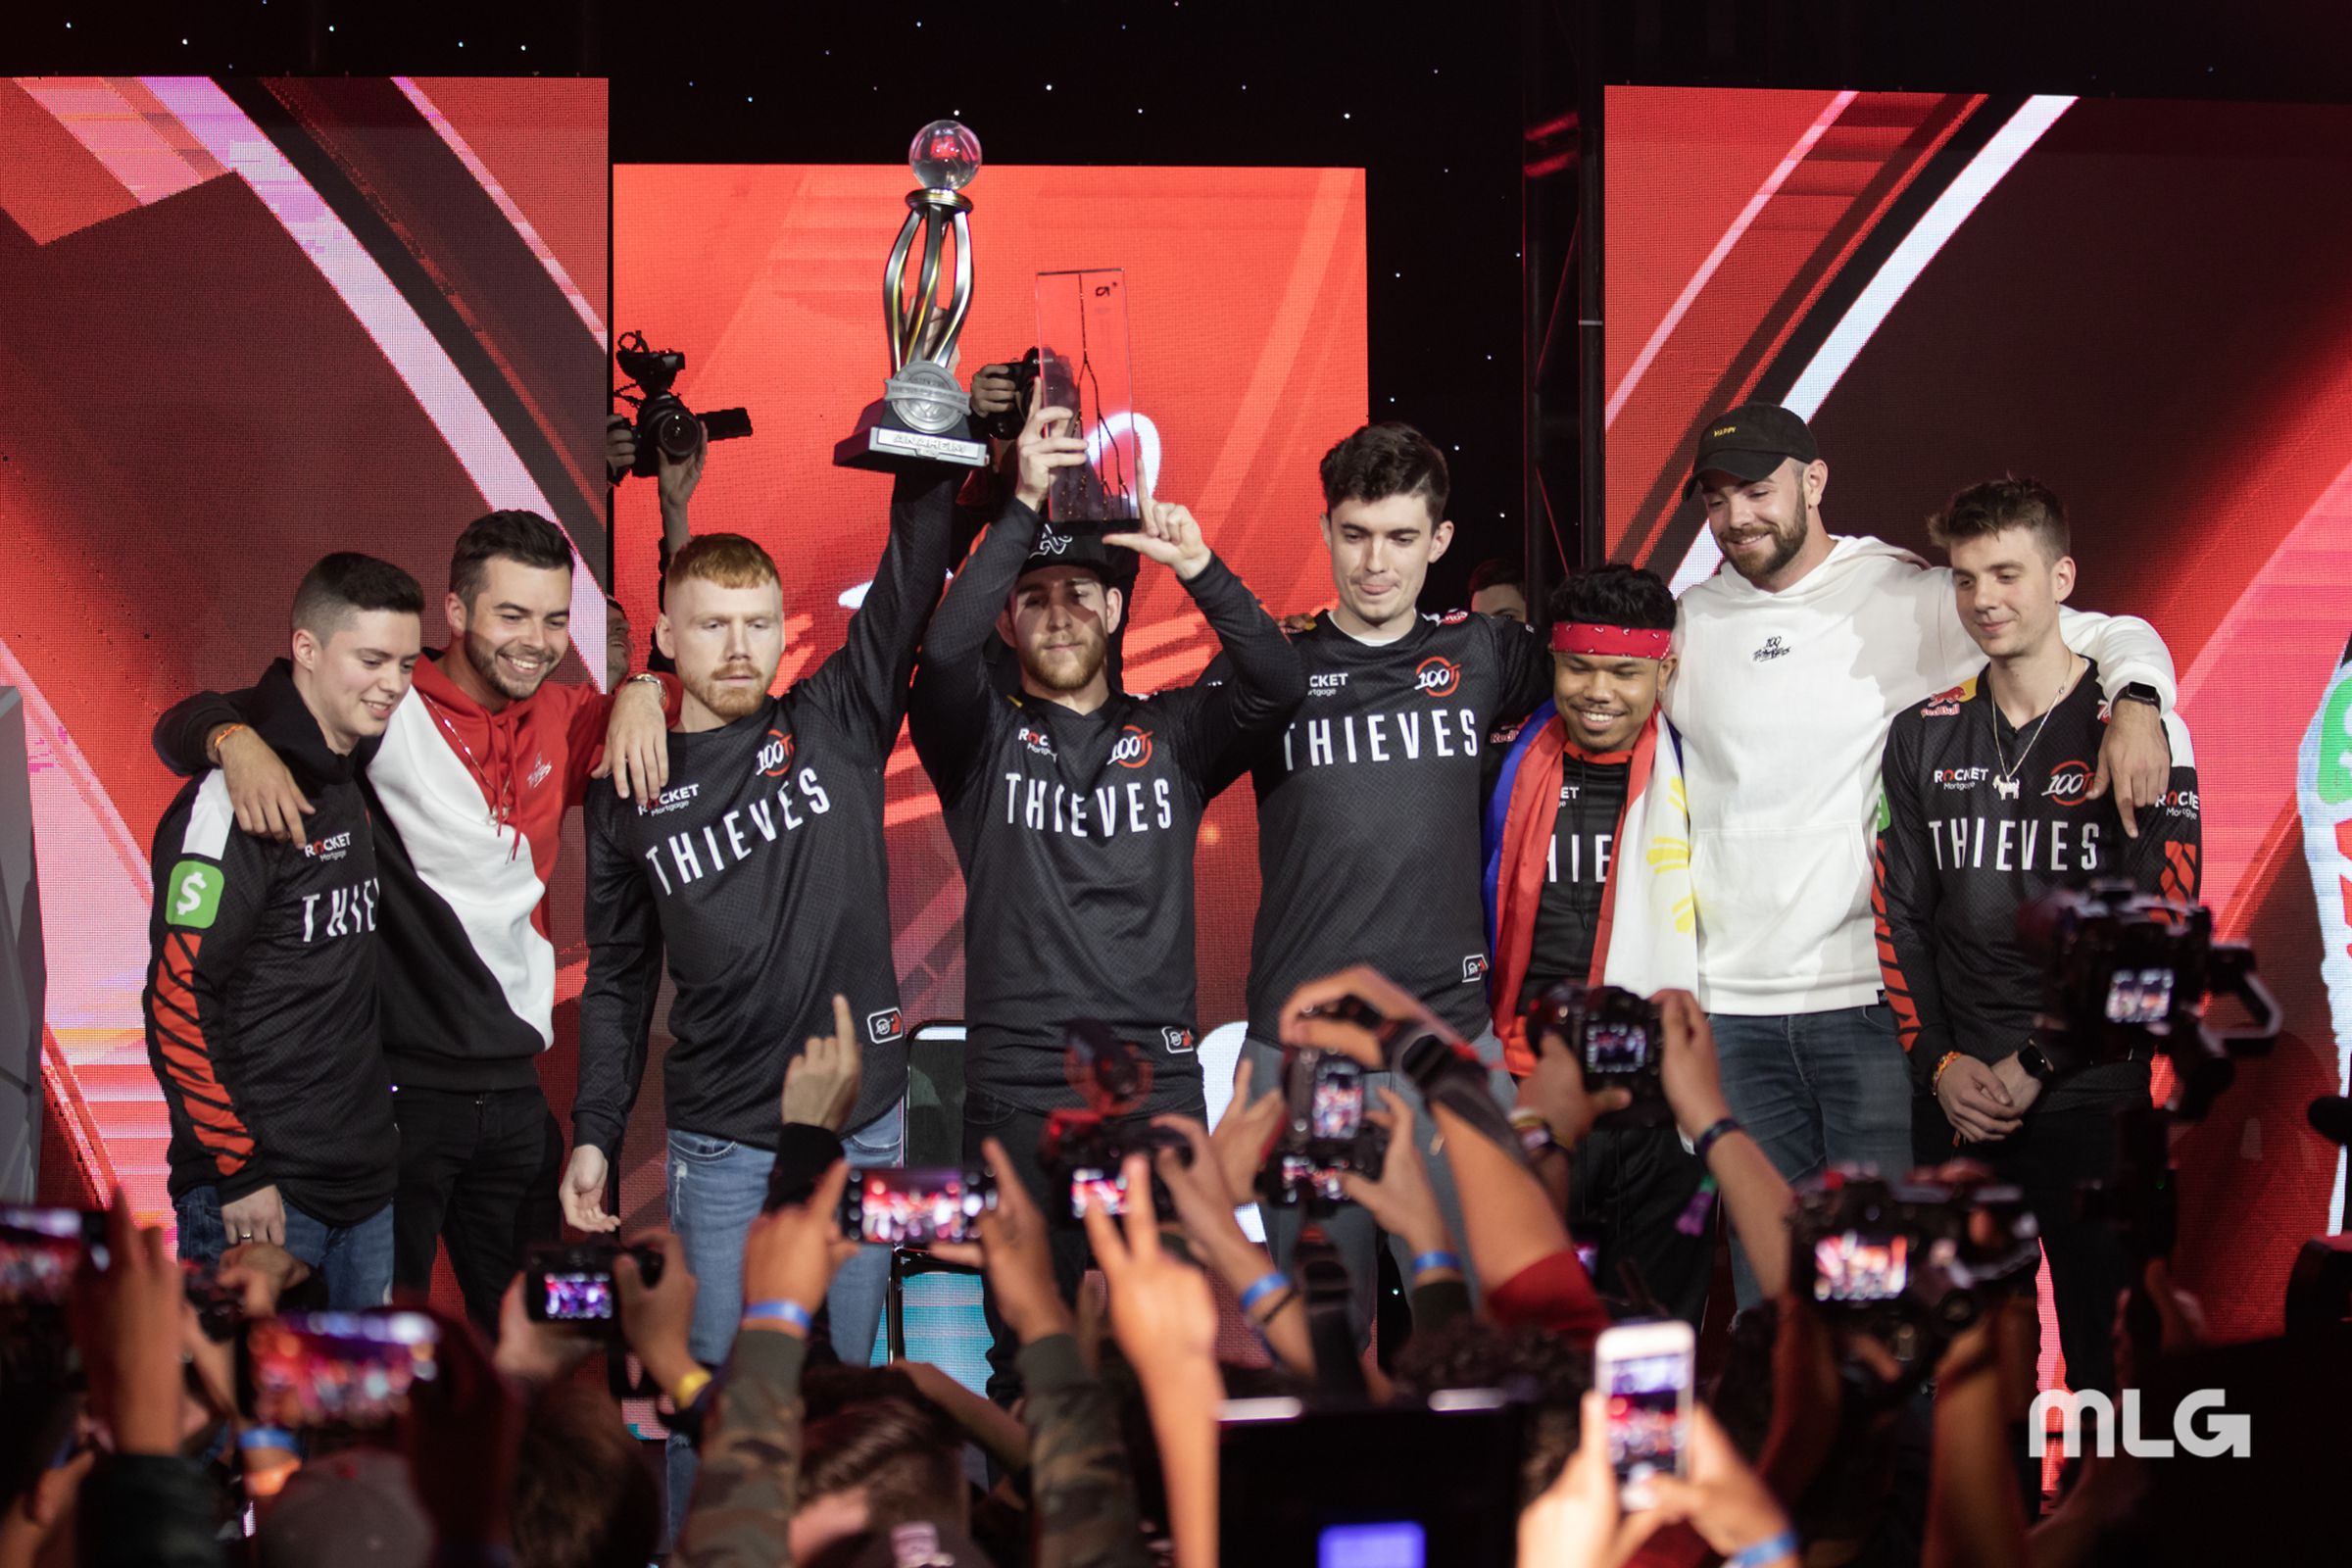 100 Thieves’ Call of Duty team after capturing the Anaheim Cup.